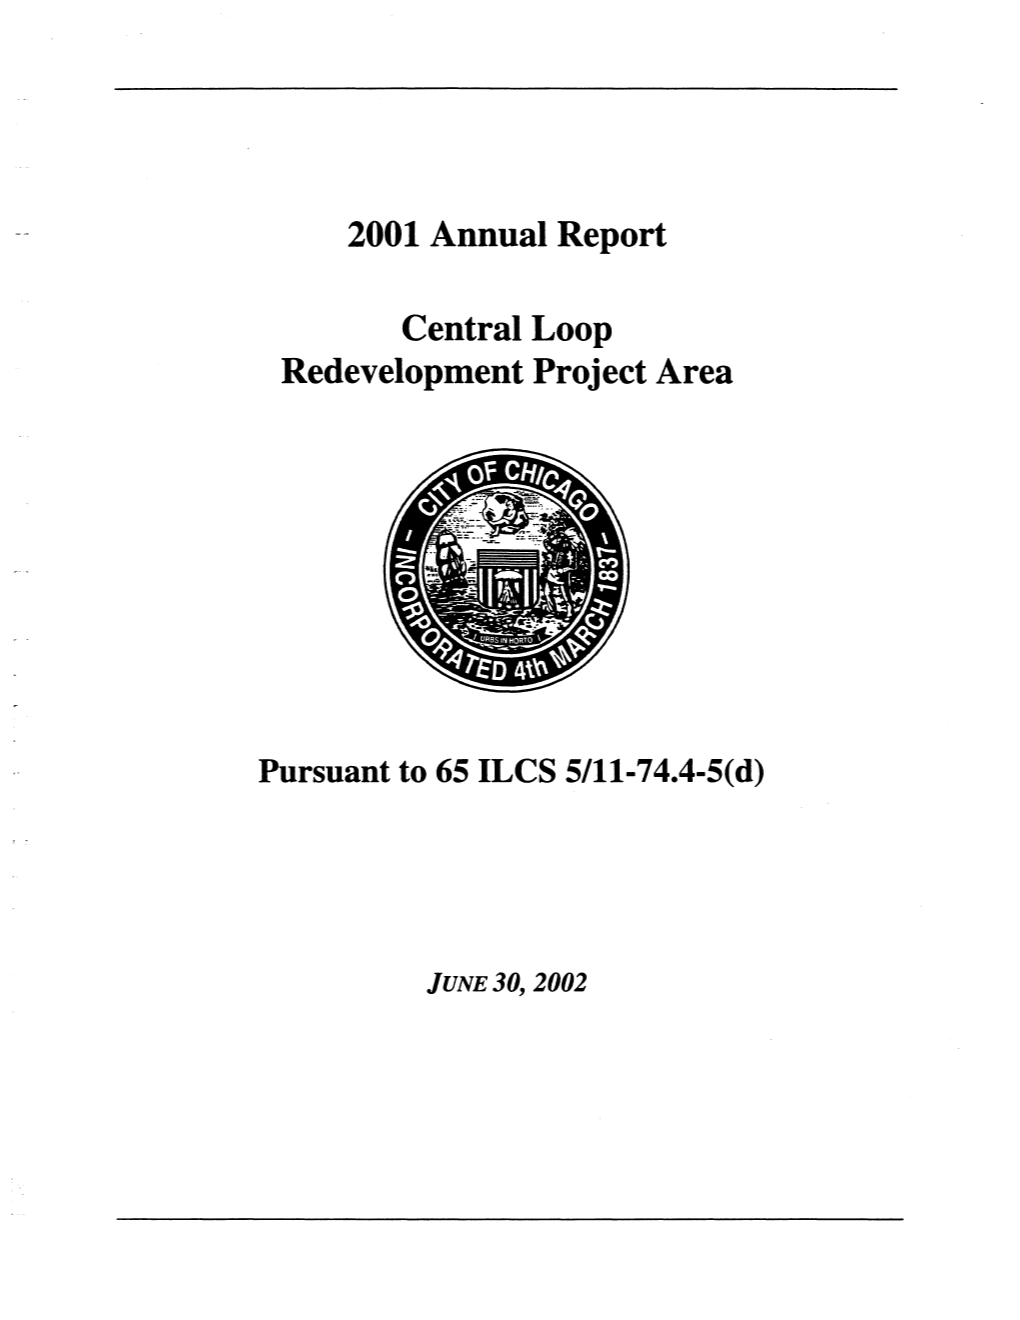 2001 Annual Report Central Loop Redevelopment Project Area